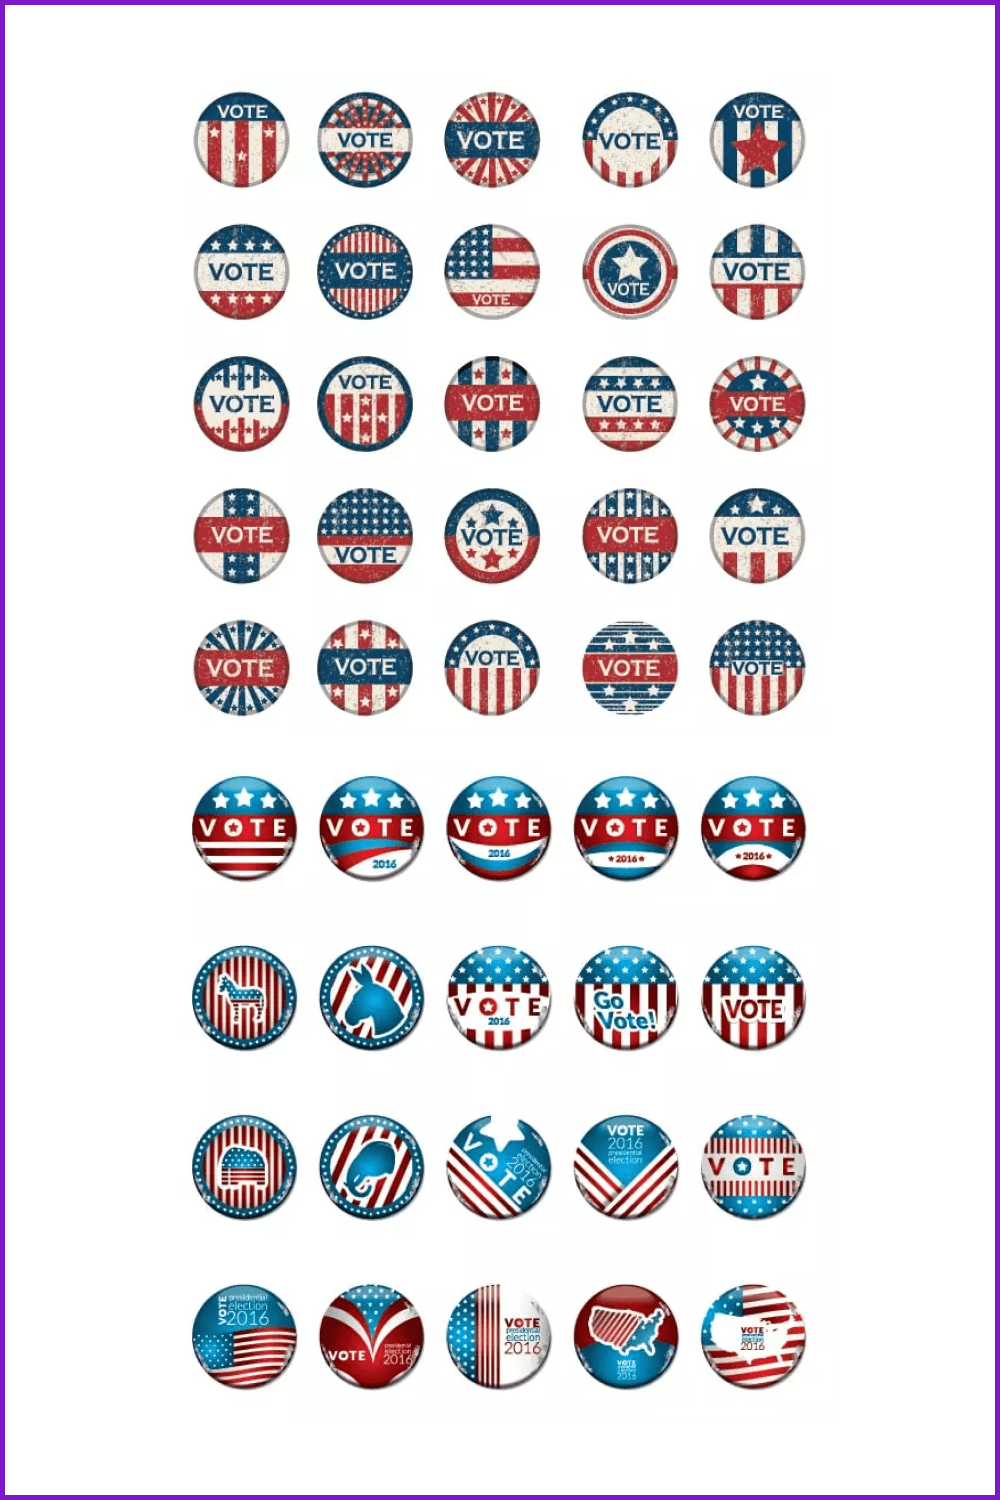 America Icons: 50 Packages of Icons and Badges Related to USA Election.